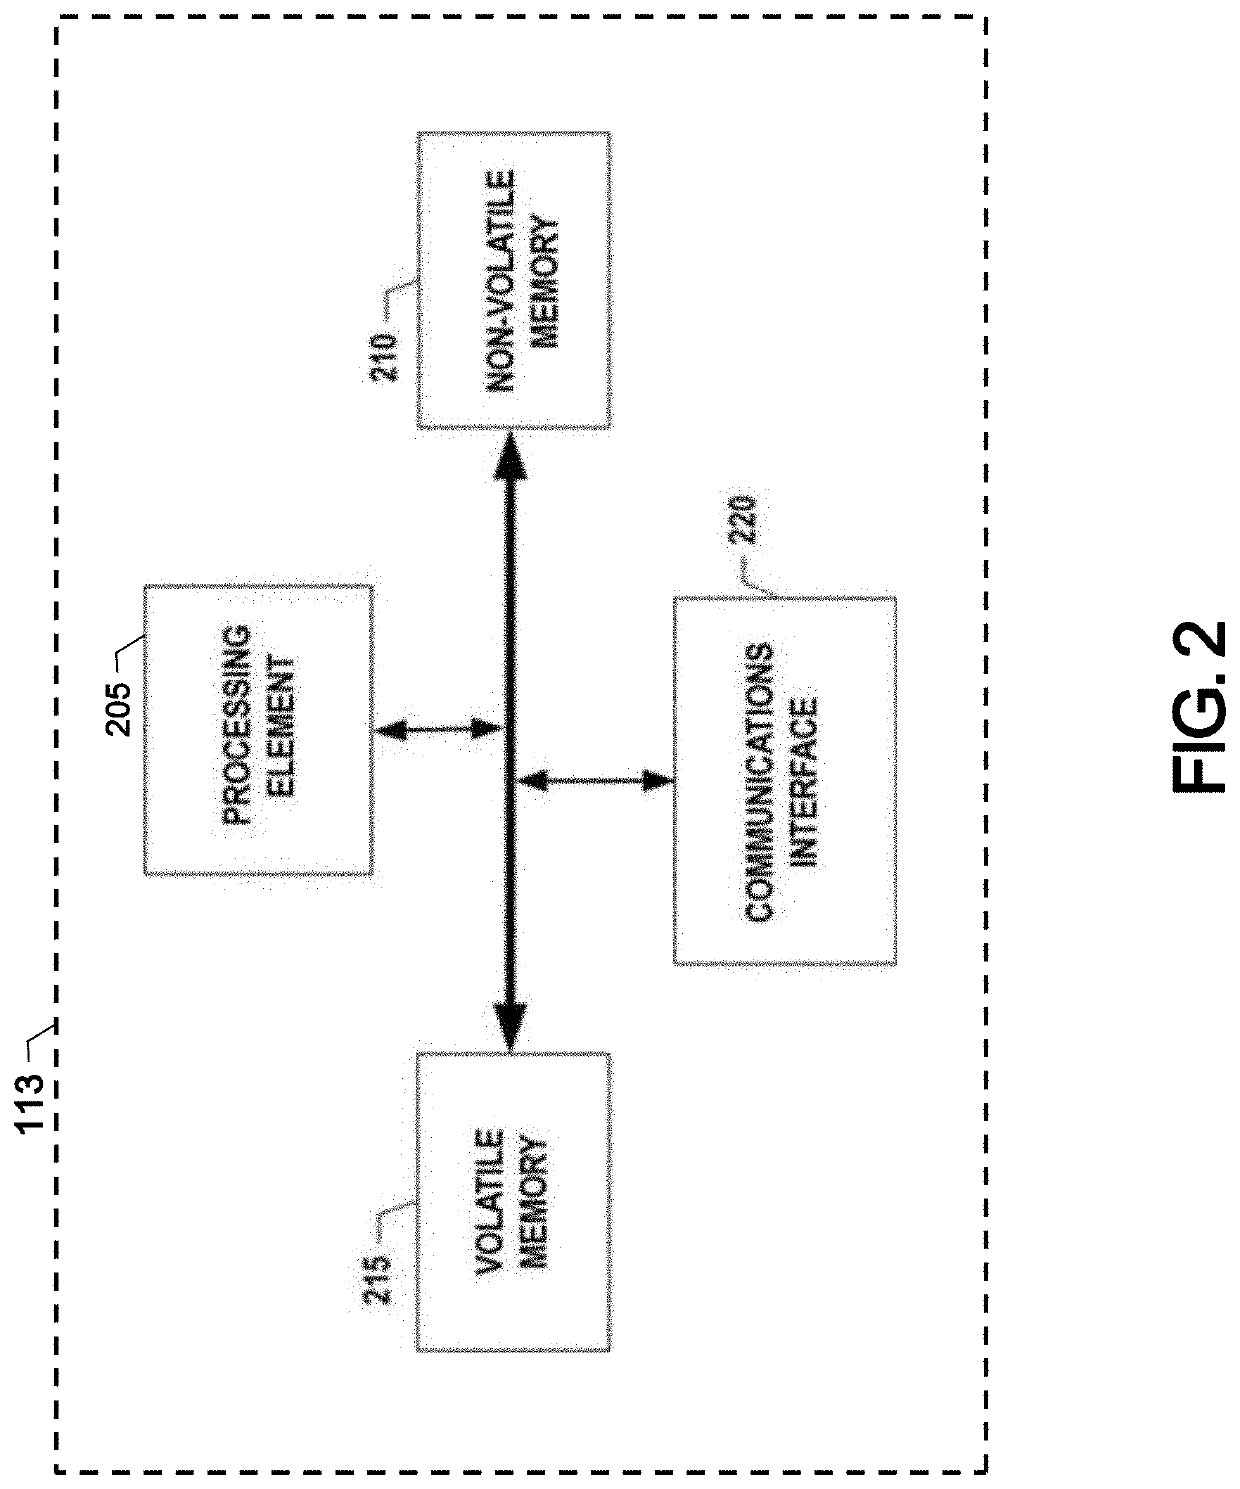 Systems and methods for time-based abnormality identification within uniform dataset